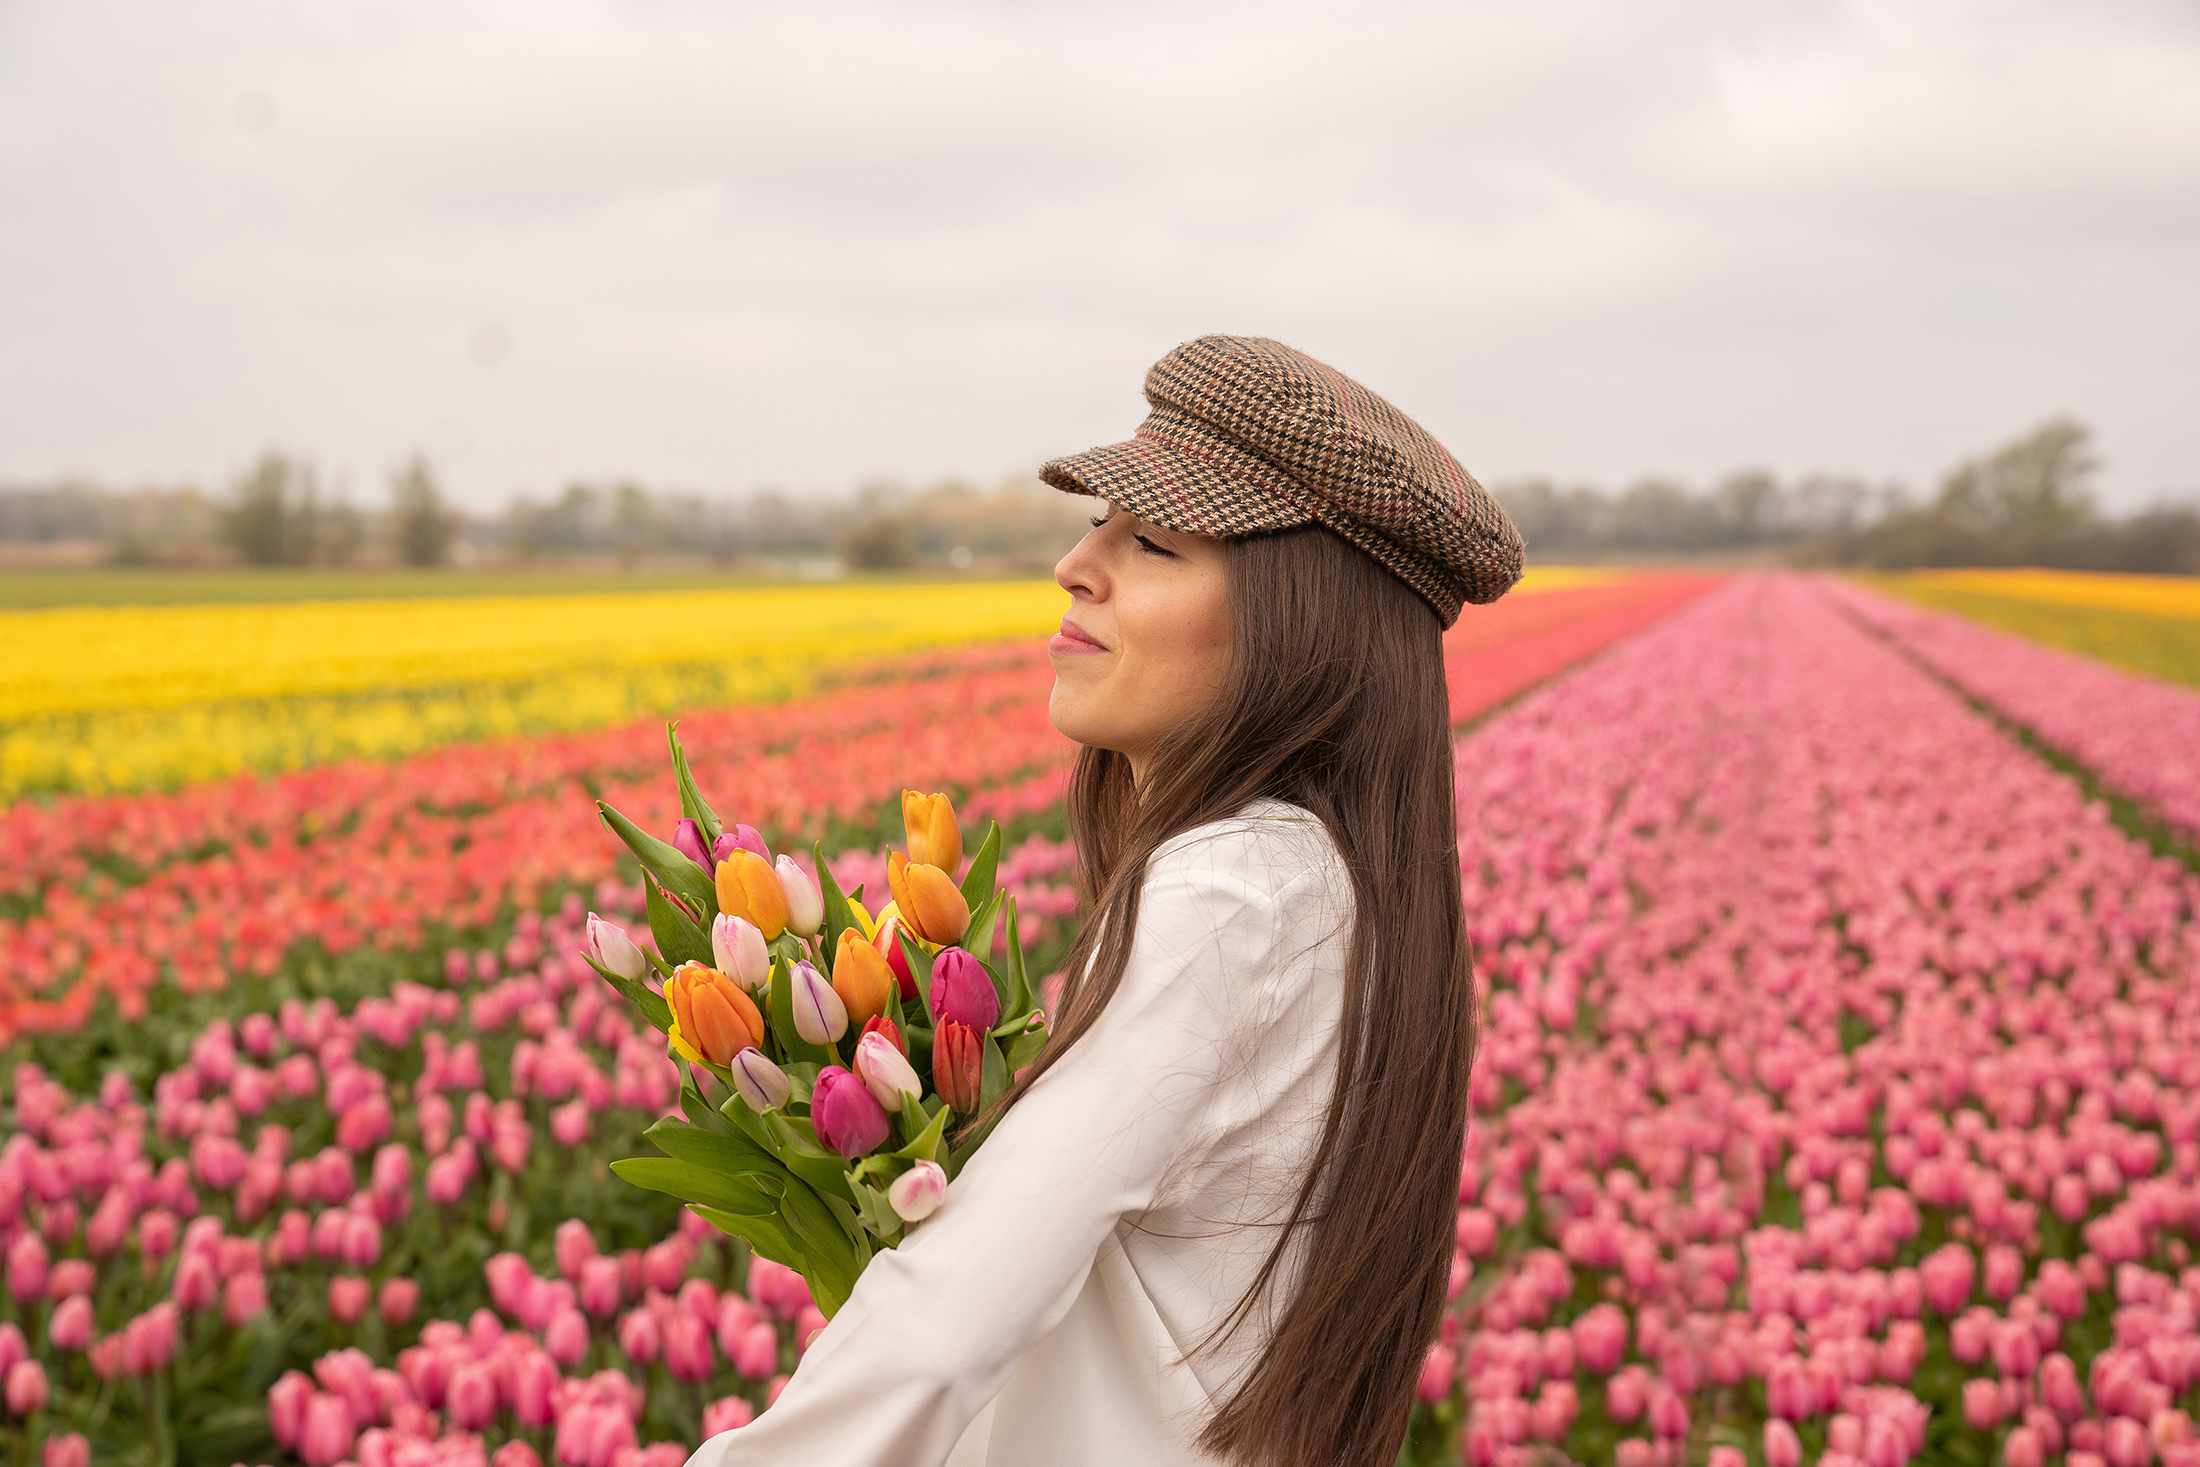 Tulip garden photo idea of a woman with a tulip bouquet surrounded by colorful tulip fields.